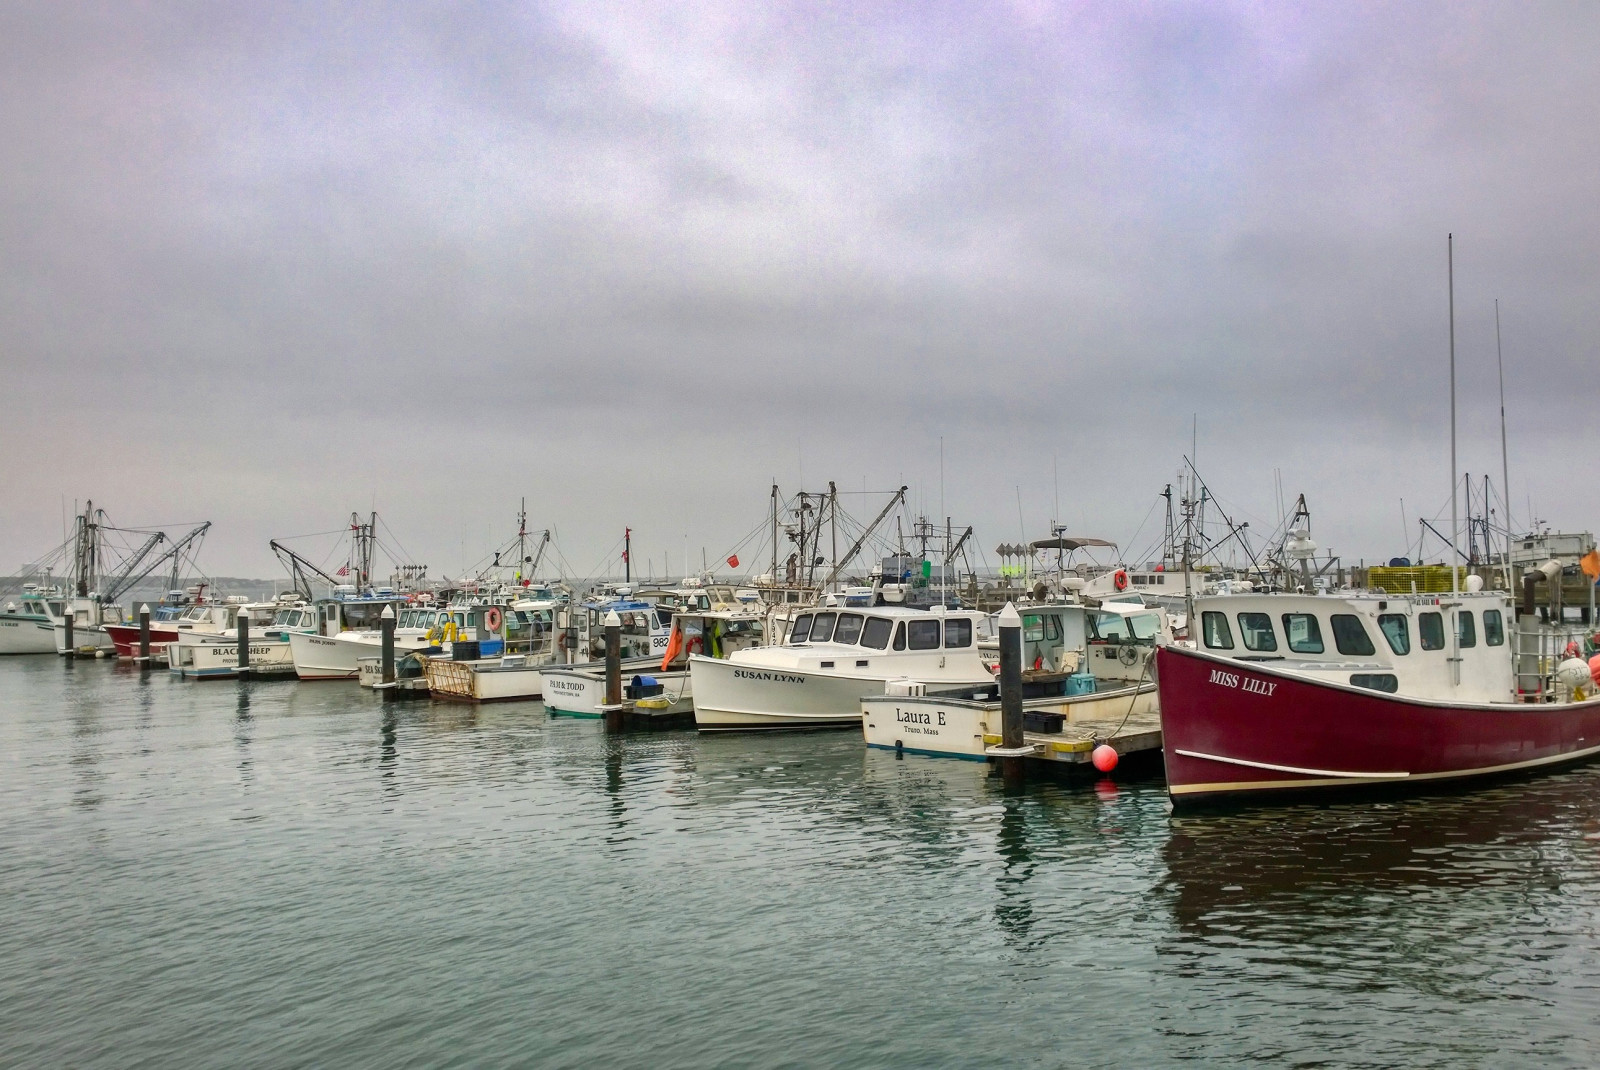 Boats docked in the water on a cloudy day in Provincetown